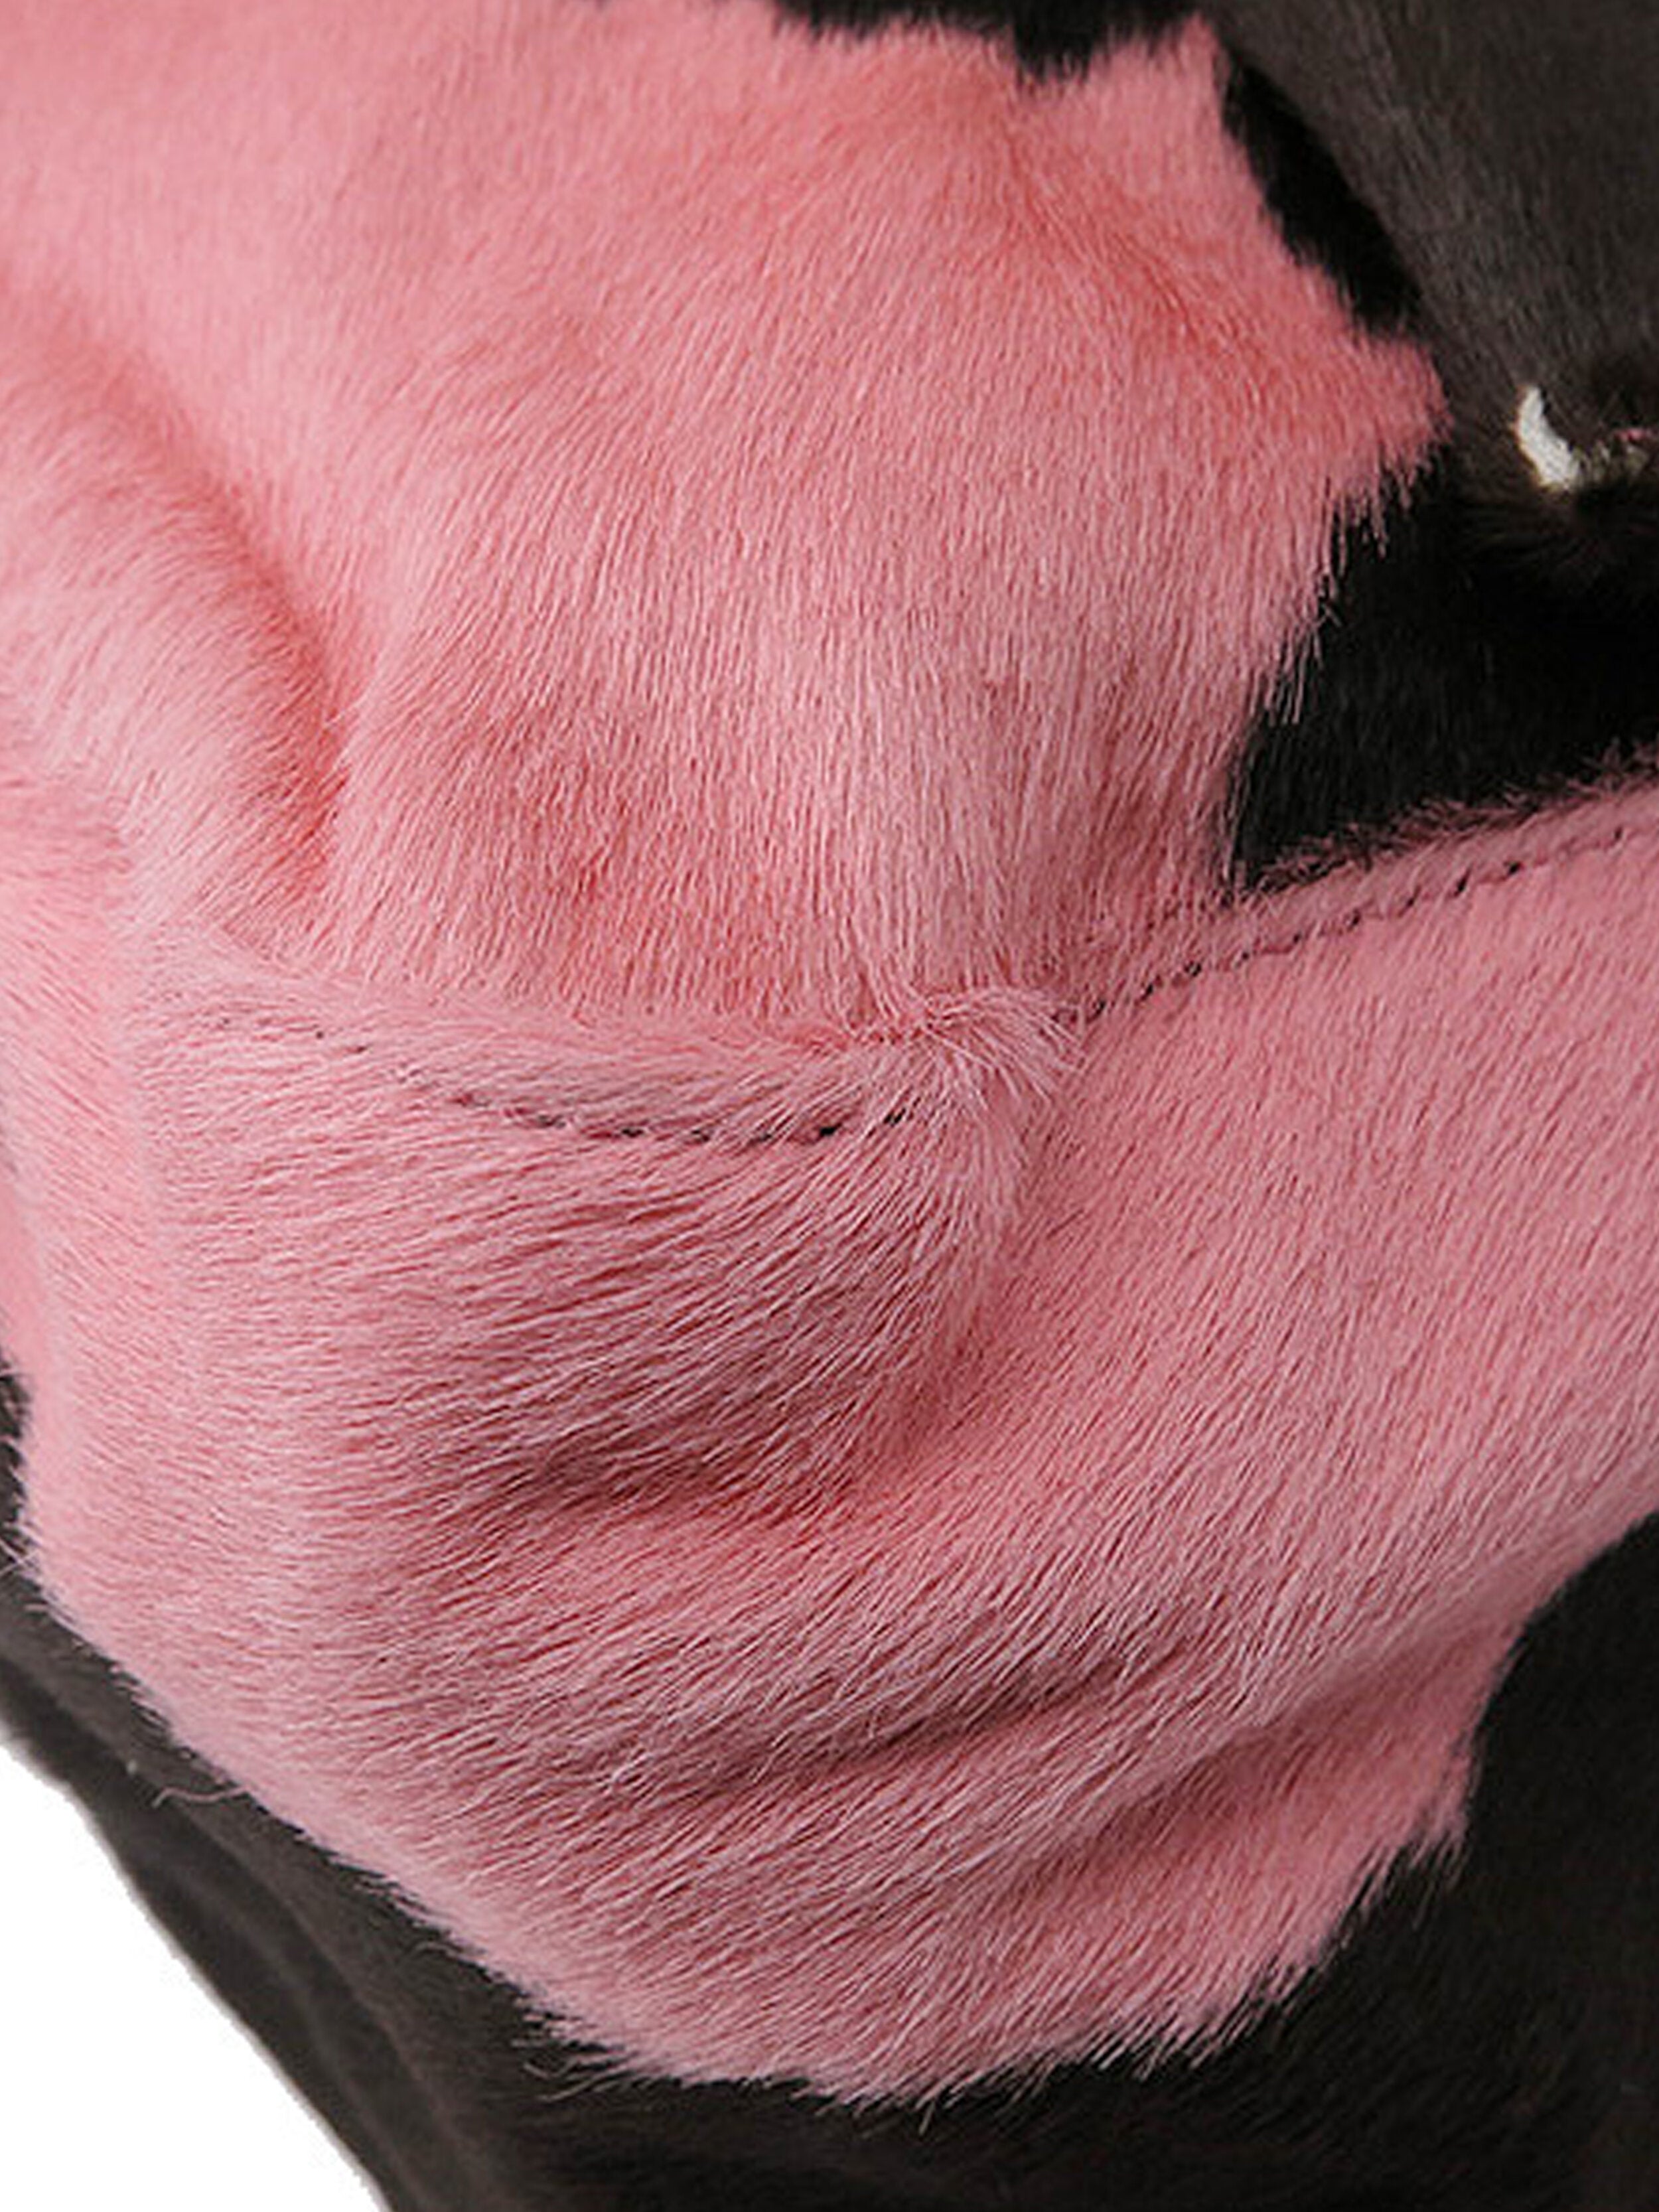 Fendi 2000s Rare Pink and Black Pony Hair Baguette